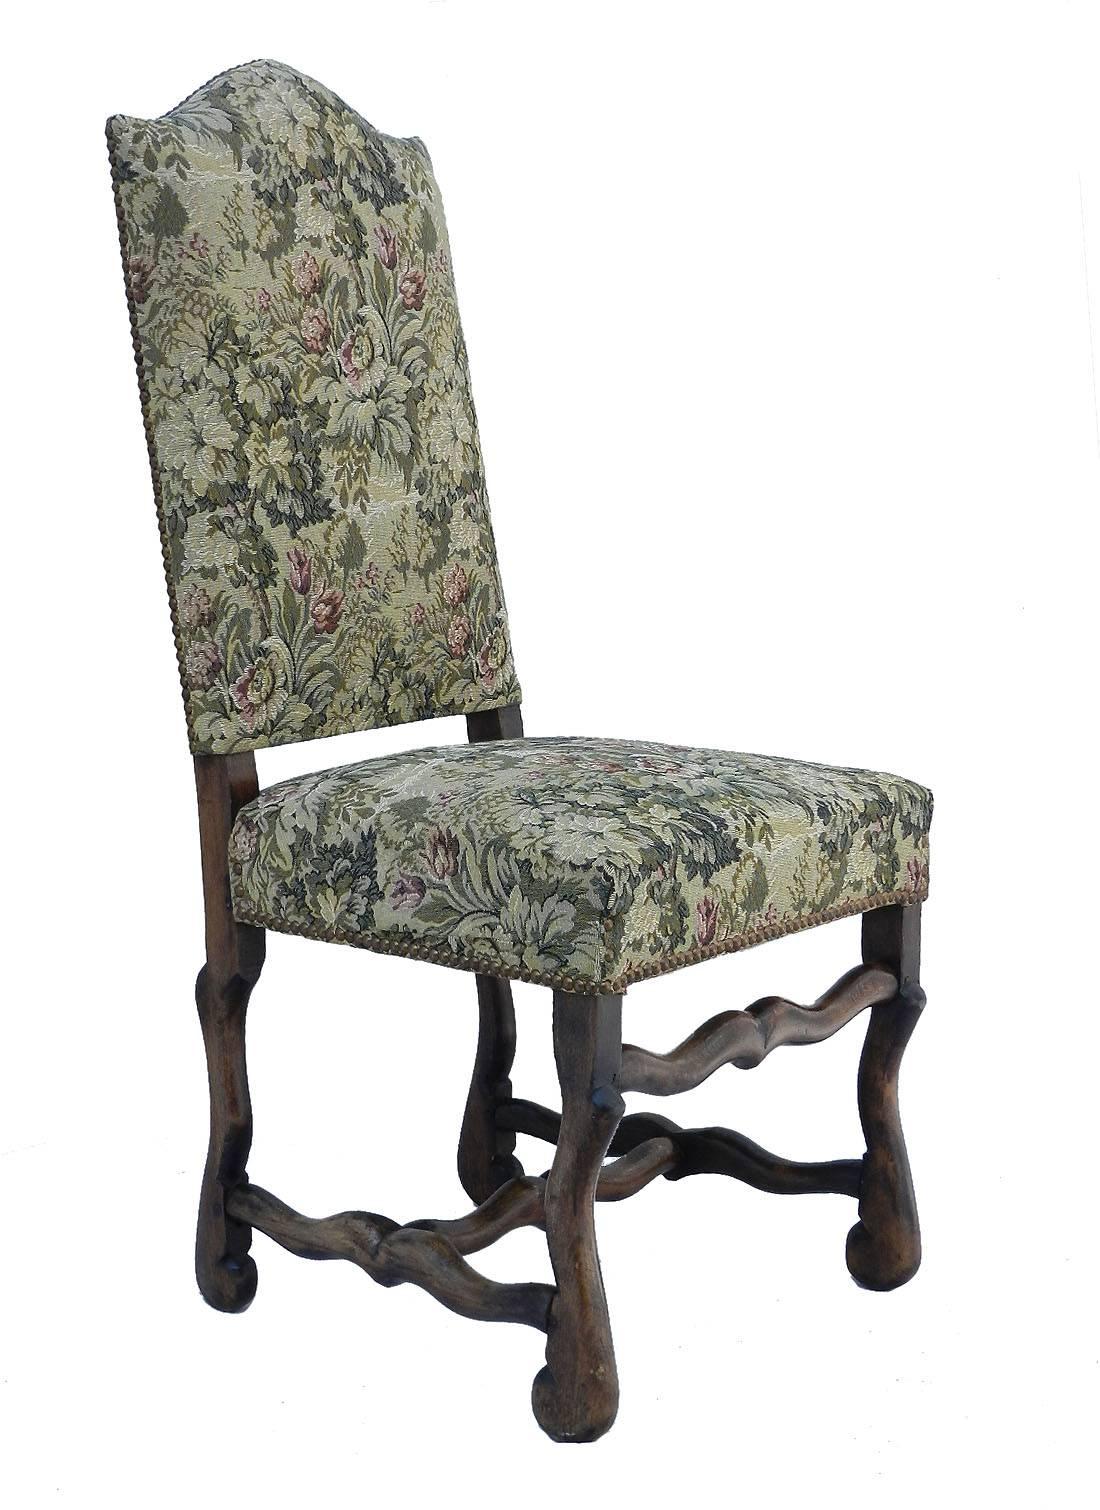 Six French dining chairs Os de Mouton original French Tapestry or to Recover, circa 1910-1920
Upholstered in their original Aubusson style Tapestry top covers
Alternatively recover to fabric of your choice to suit your interior please ask if you